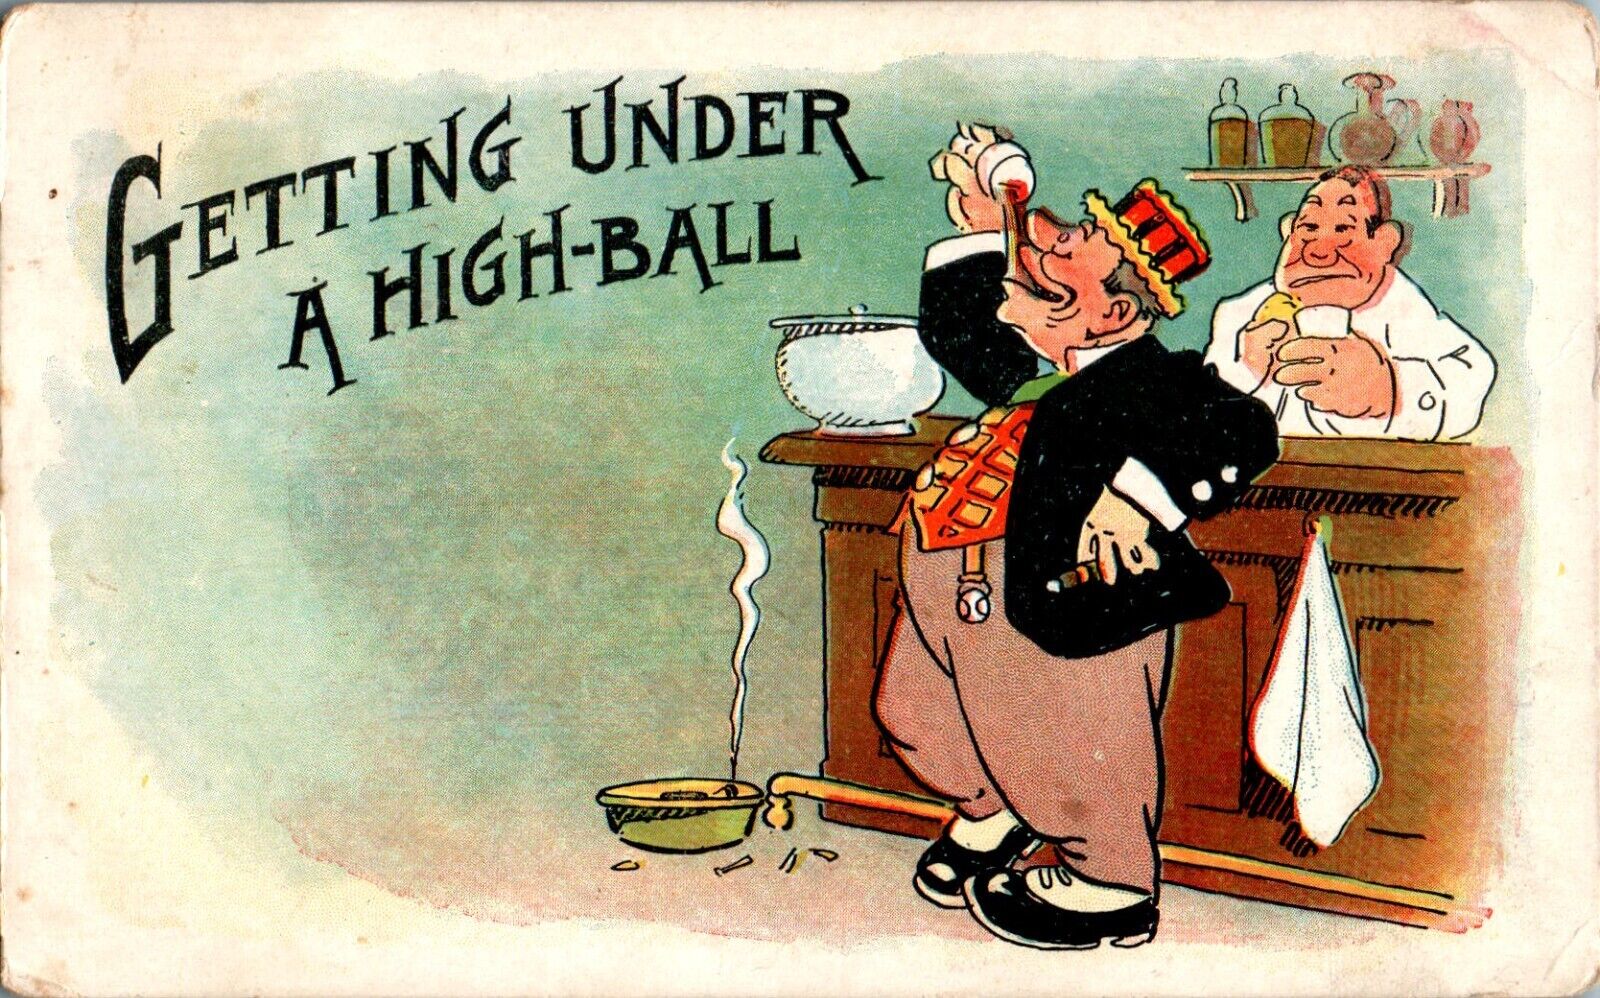 Getting Under a Highball, Drinking Humor 1908 Postcard